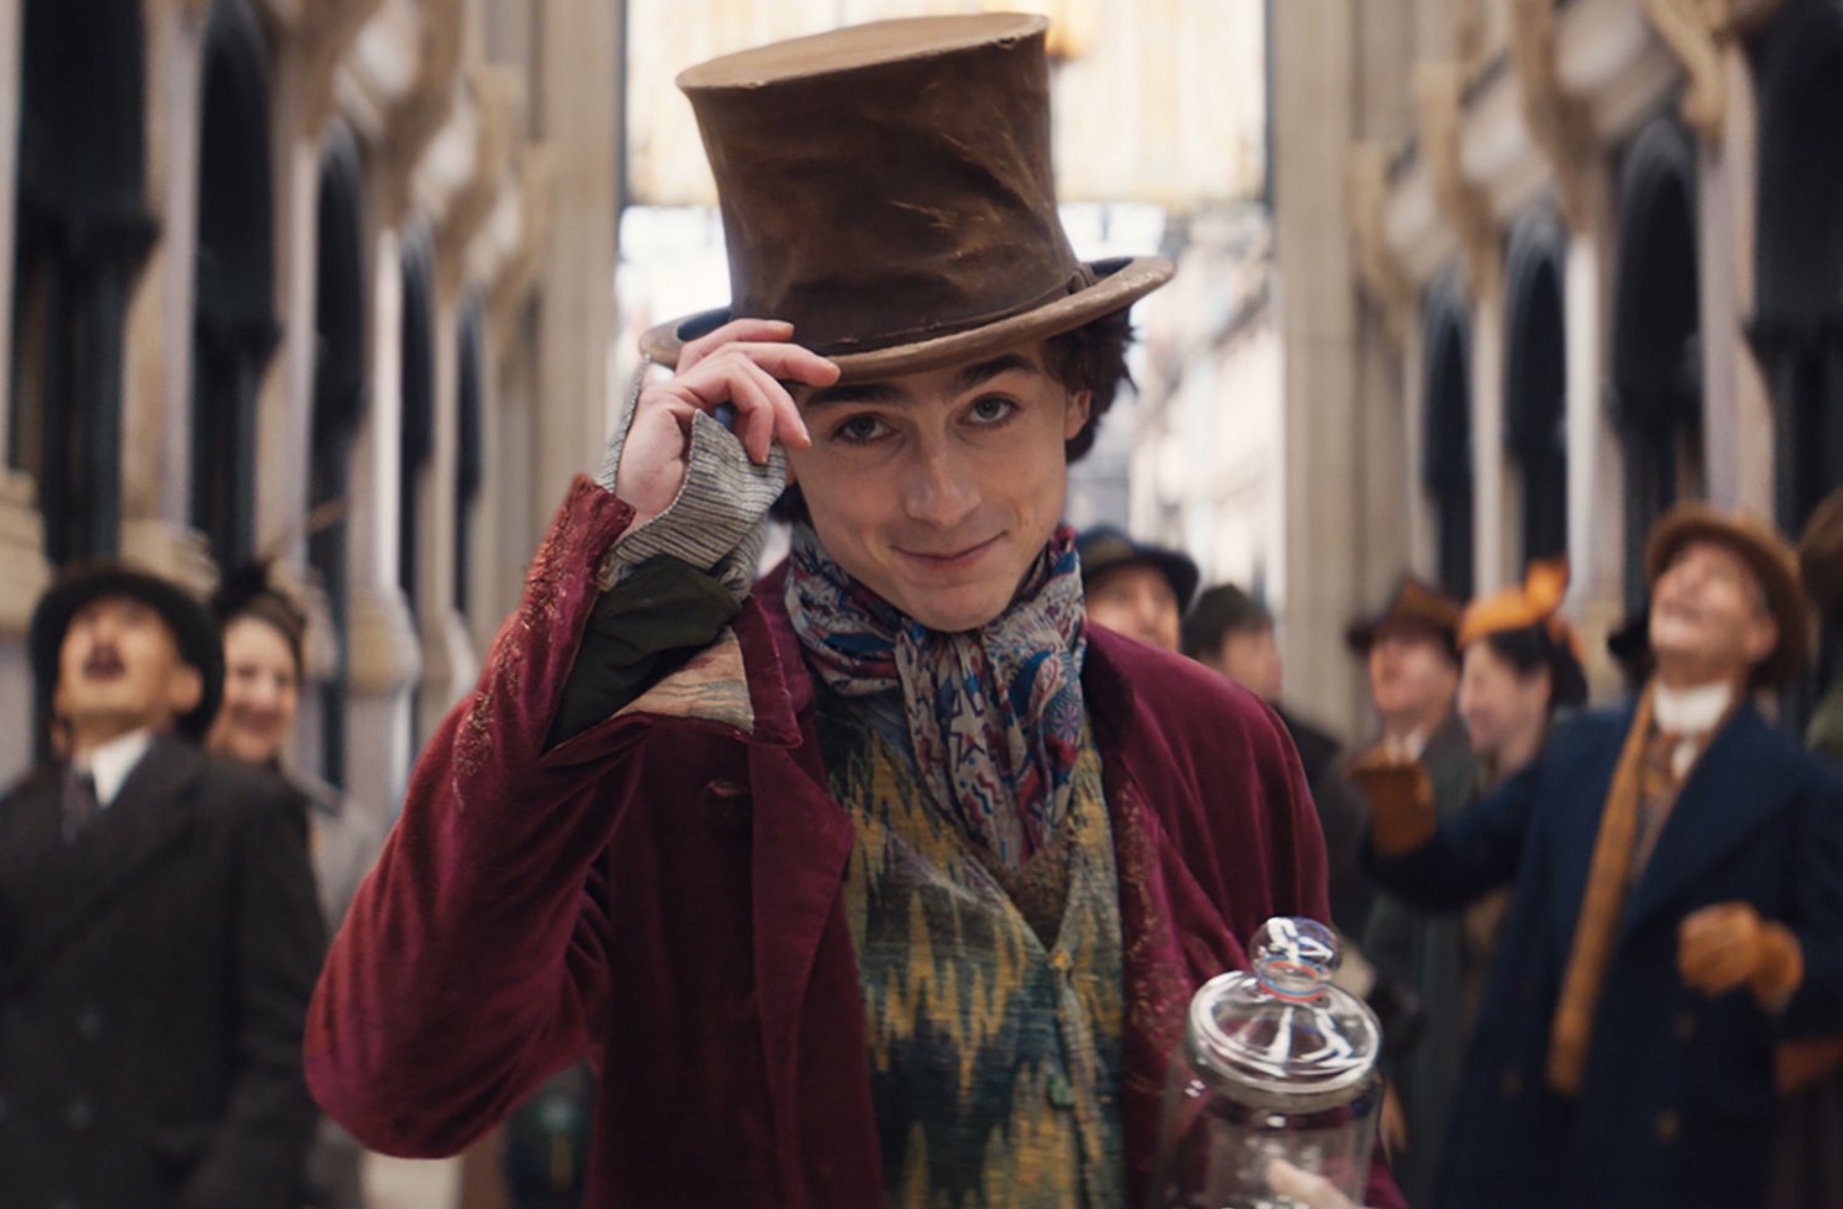 Timothy Chalamet puts on the charm in "Wonka" courtesy Warner Bros. Entertainment Inc.